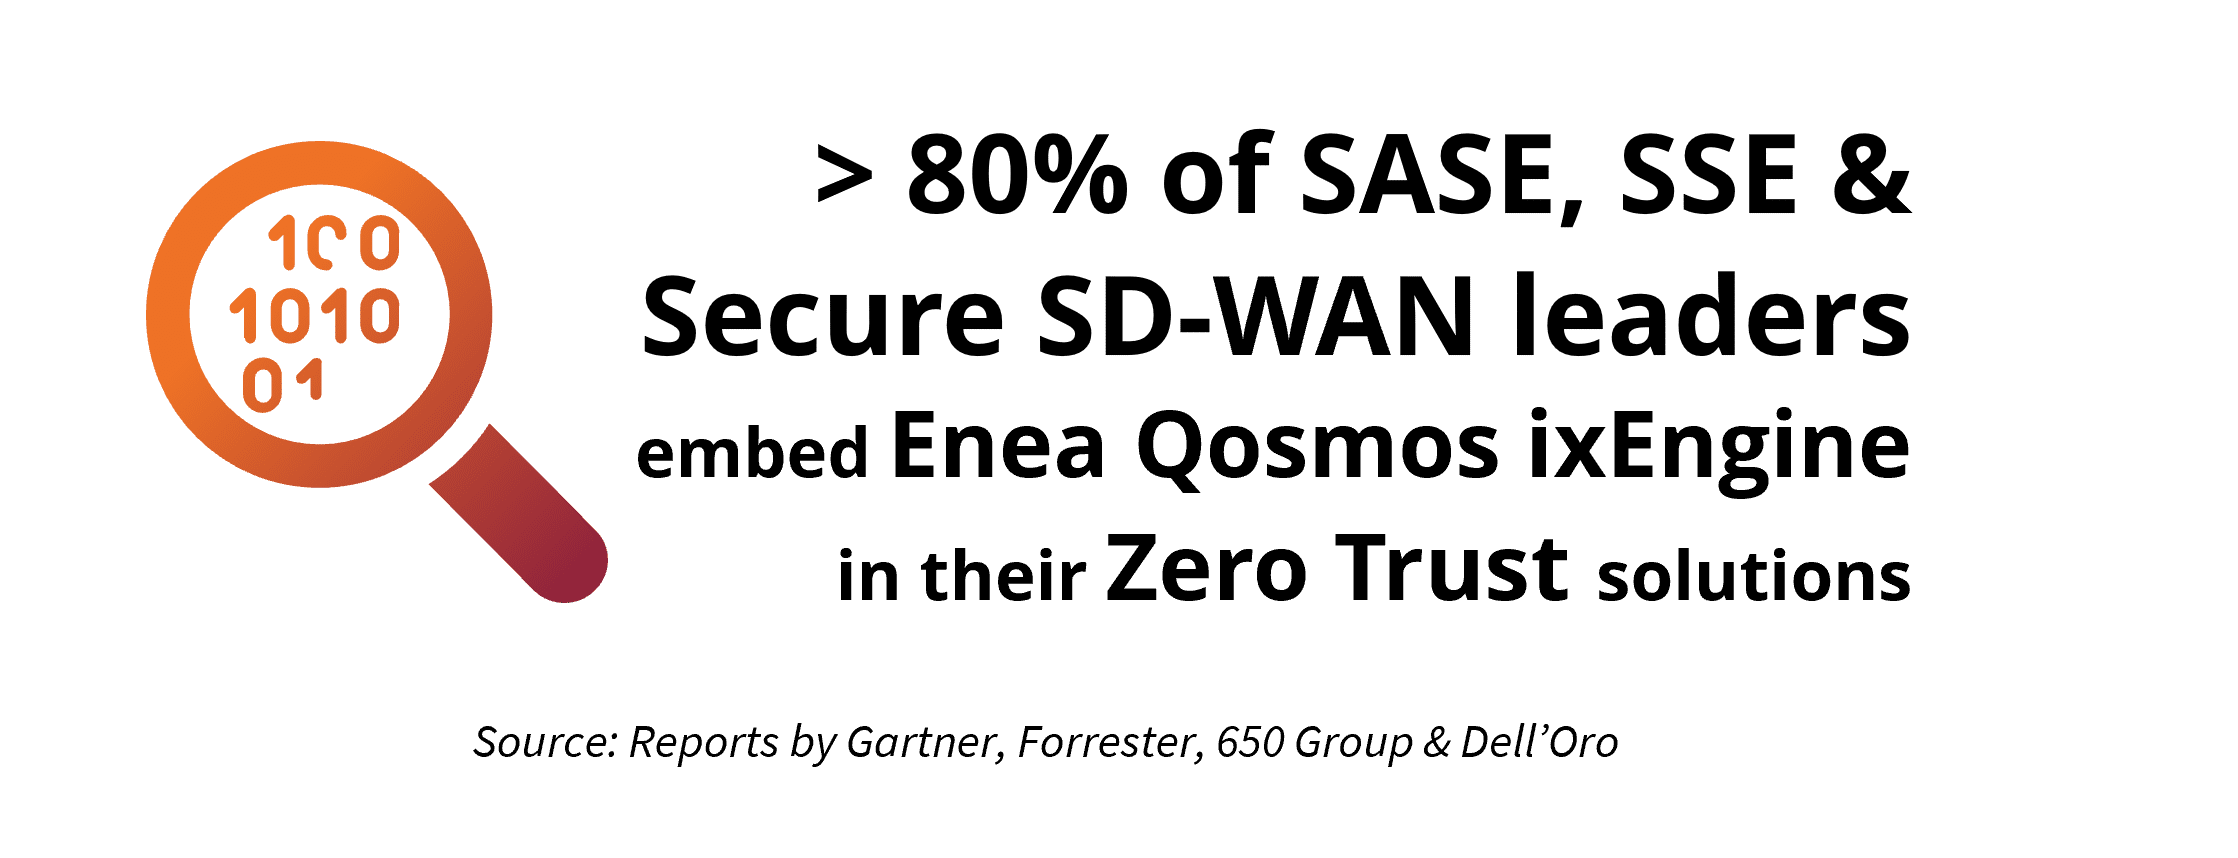 More than 80% of SASE, SSE and Secure SD-WAN leaders embed Enea Qosmos ixEngine in their Zero Trust solutions